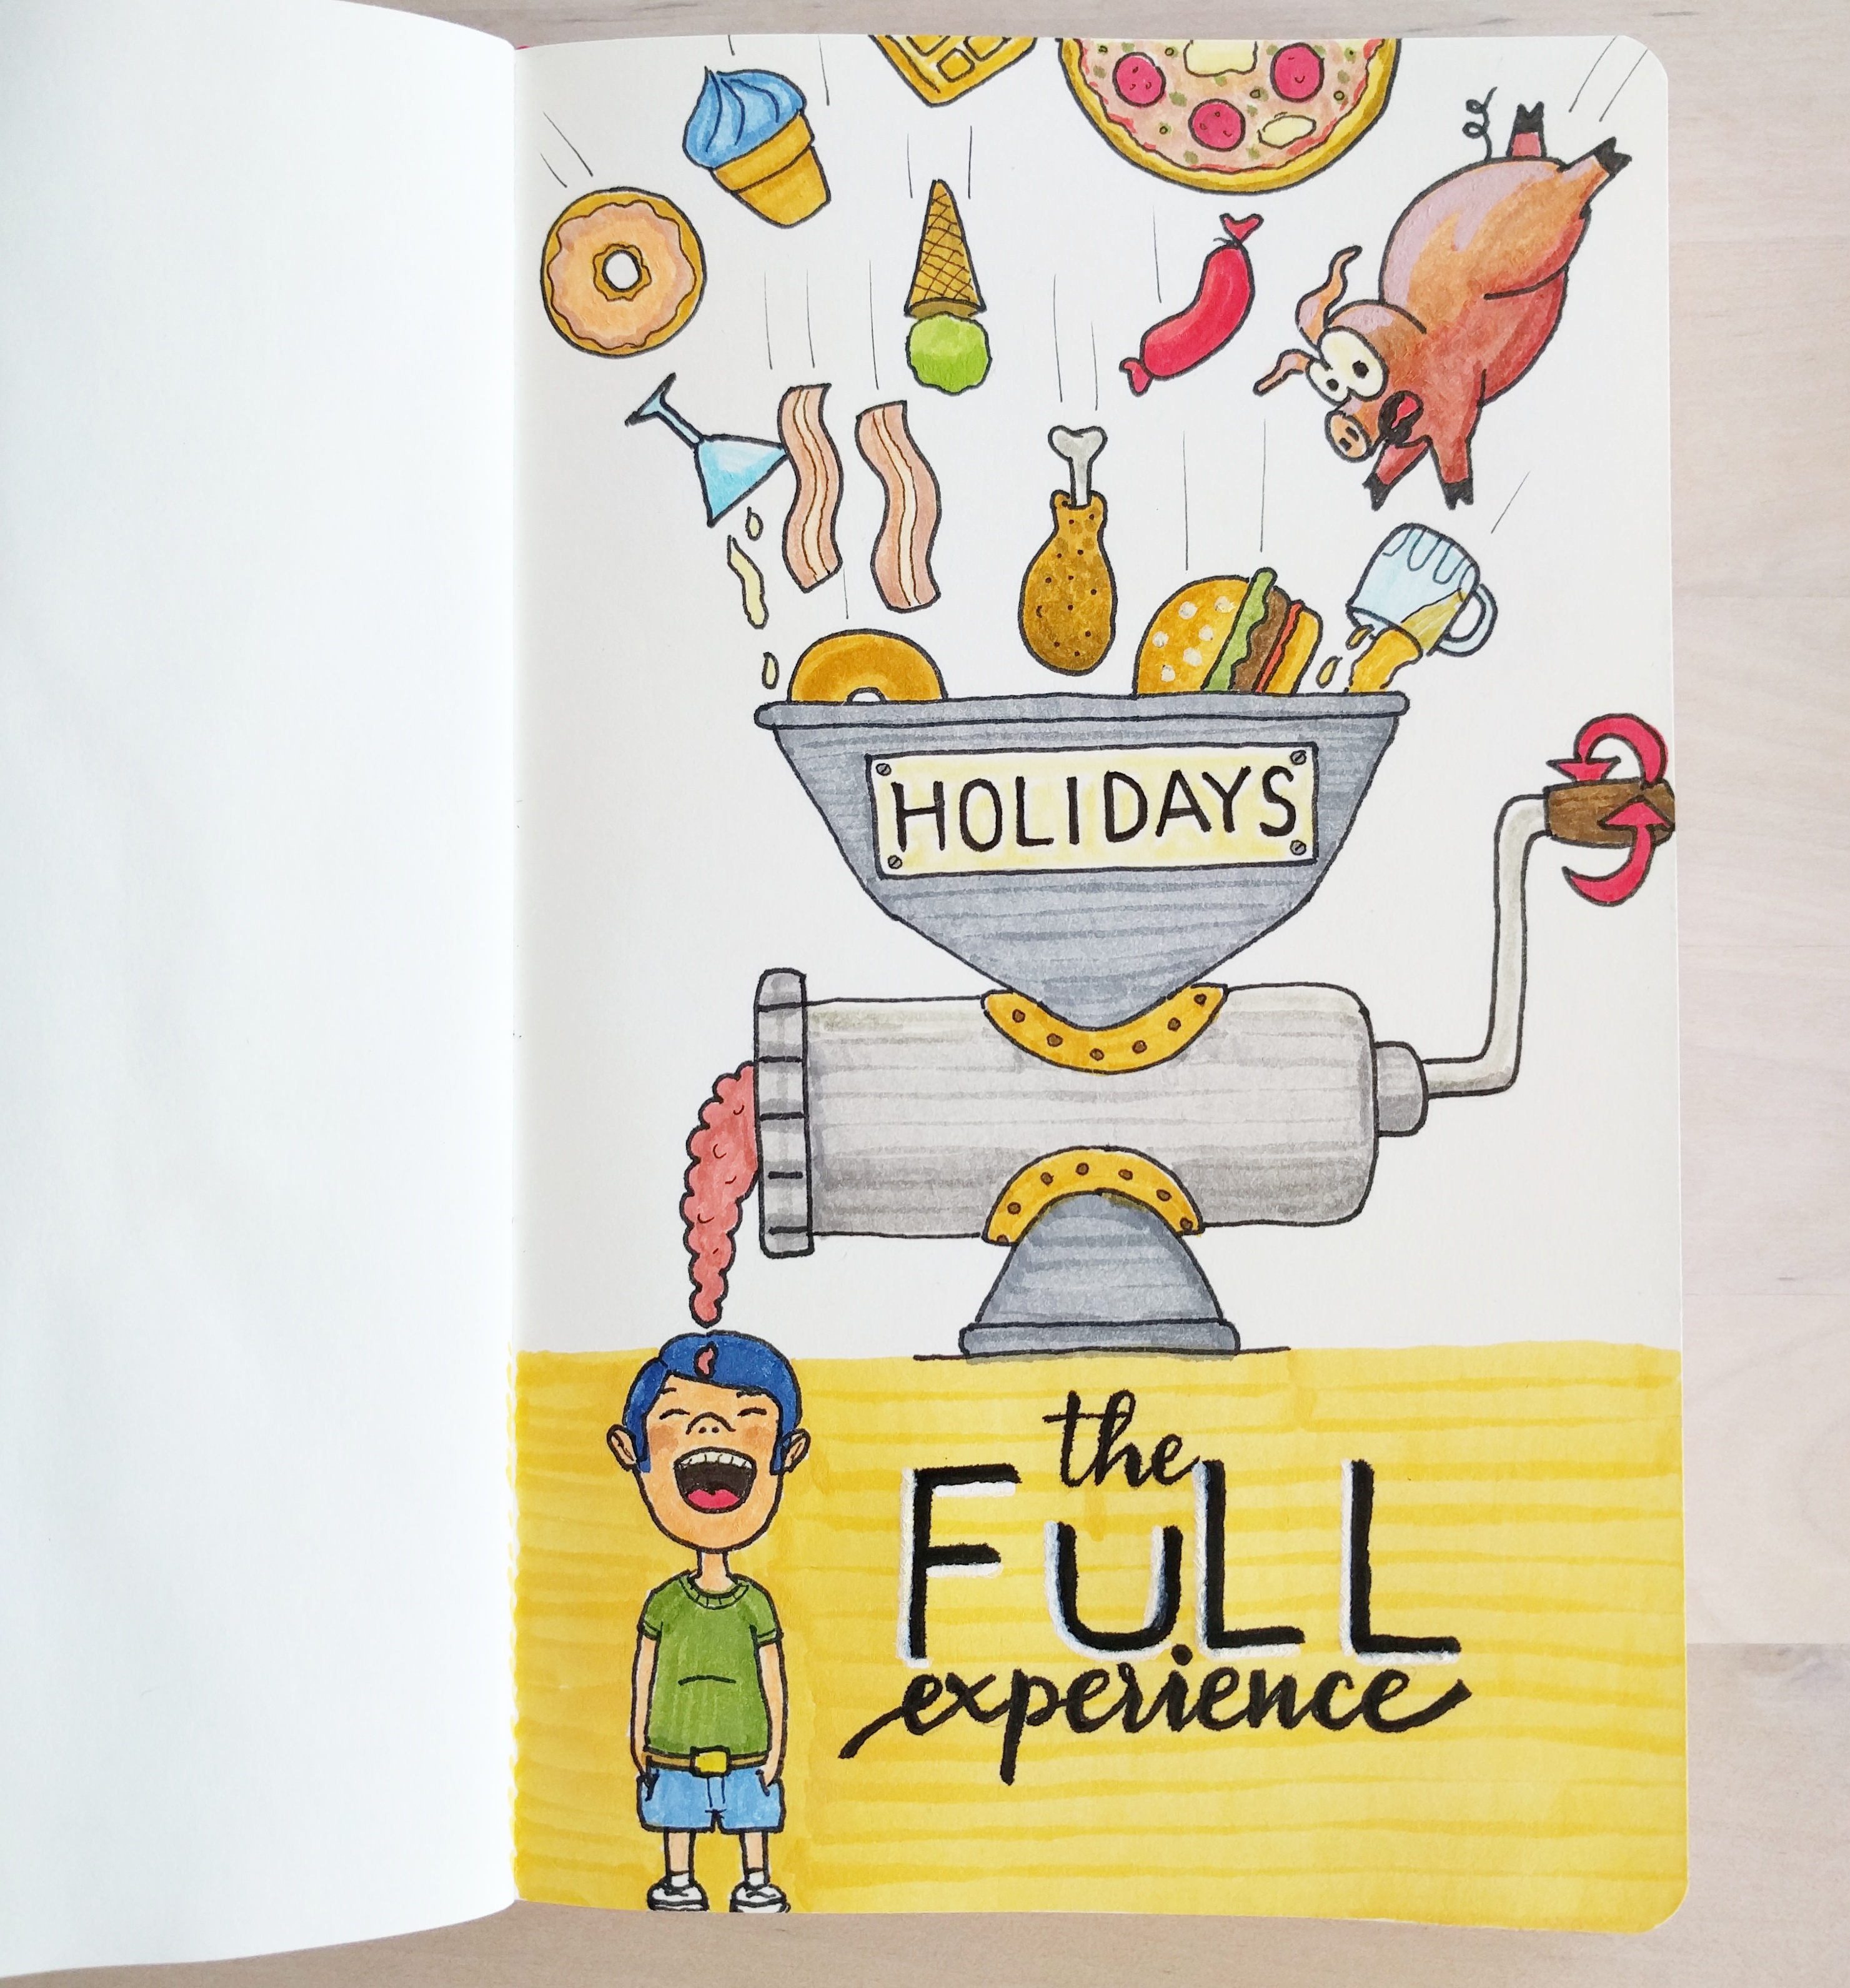 Holidays: The Full Experience